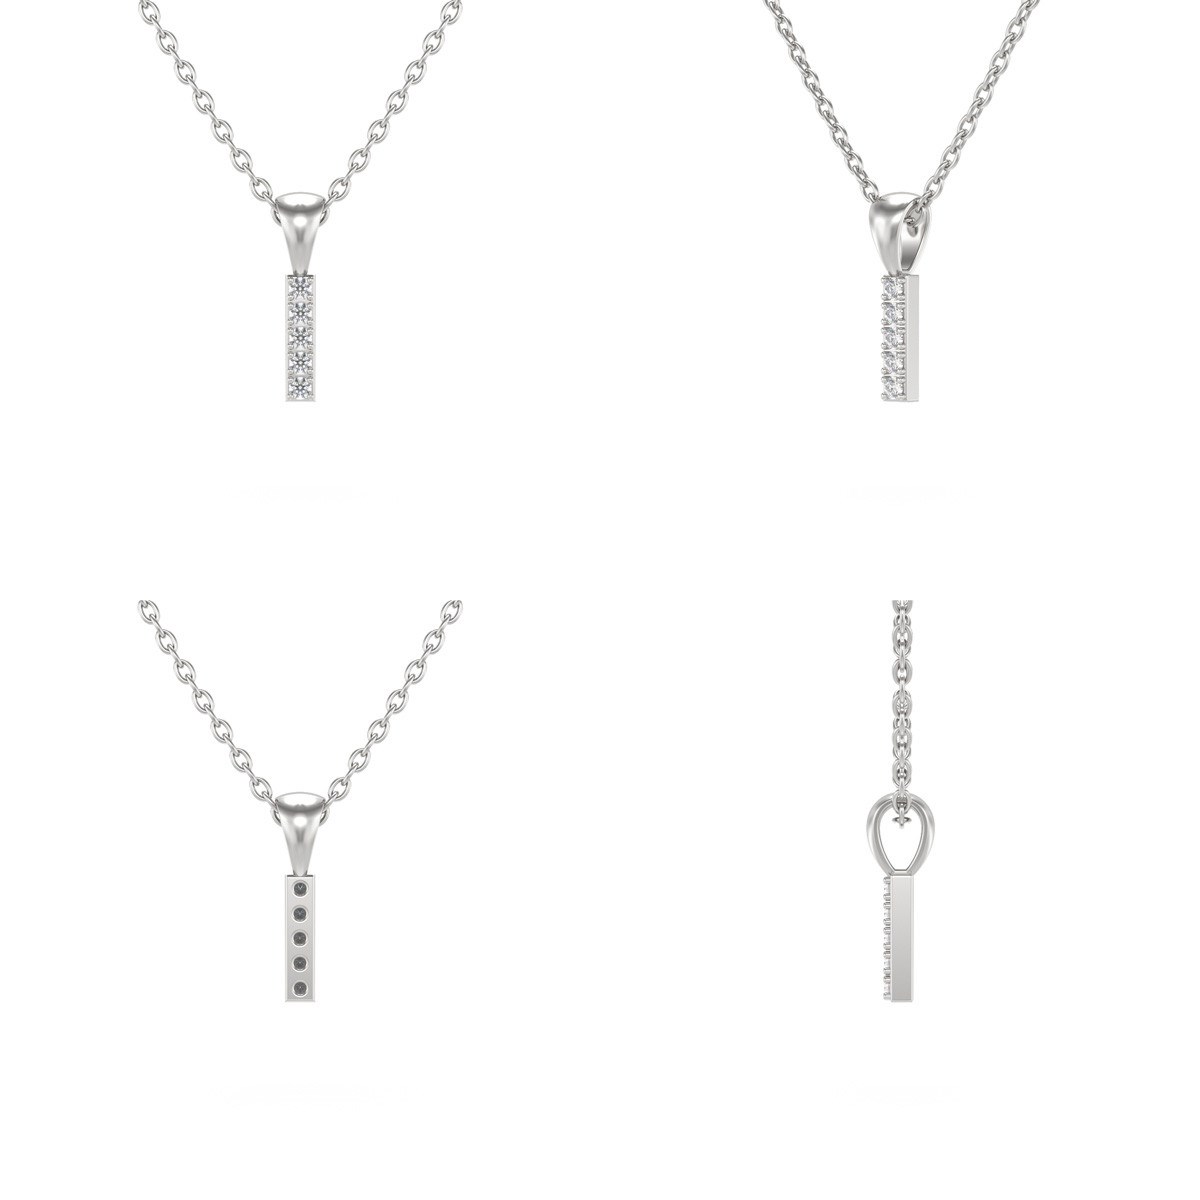 Collier Pendentif ADEN Lettre I Or 750 Blanc Diamant Chaine Or 750 incluse 0.72grs - vue 2